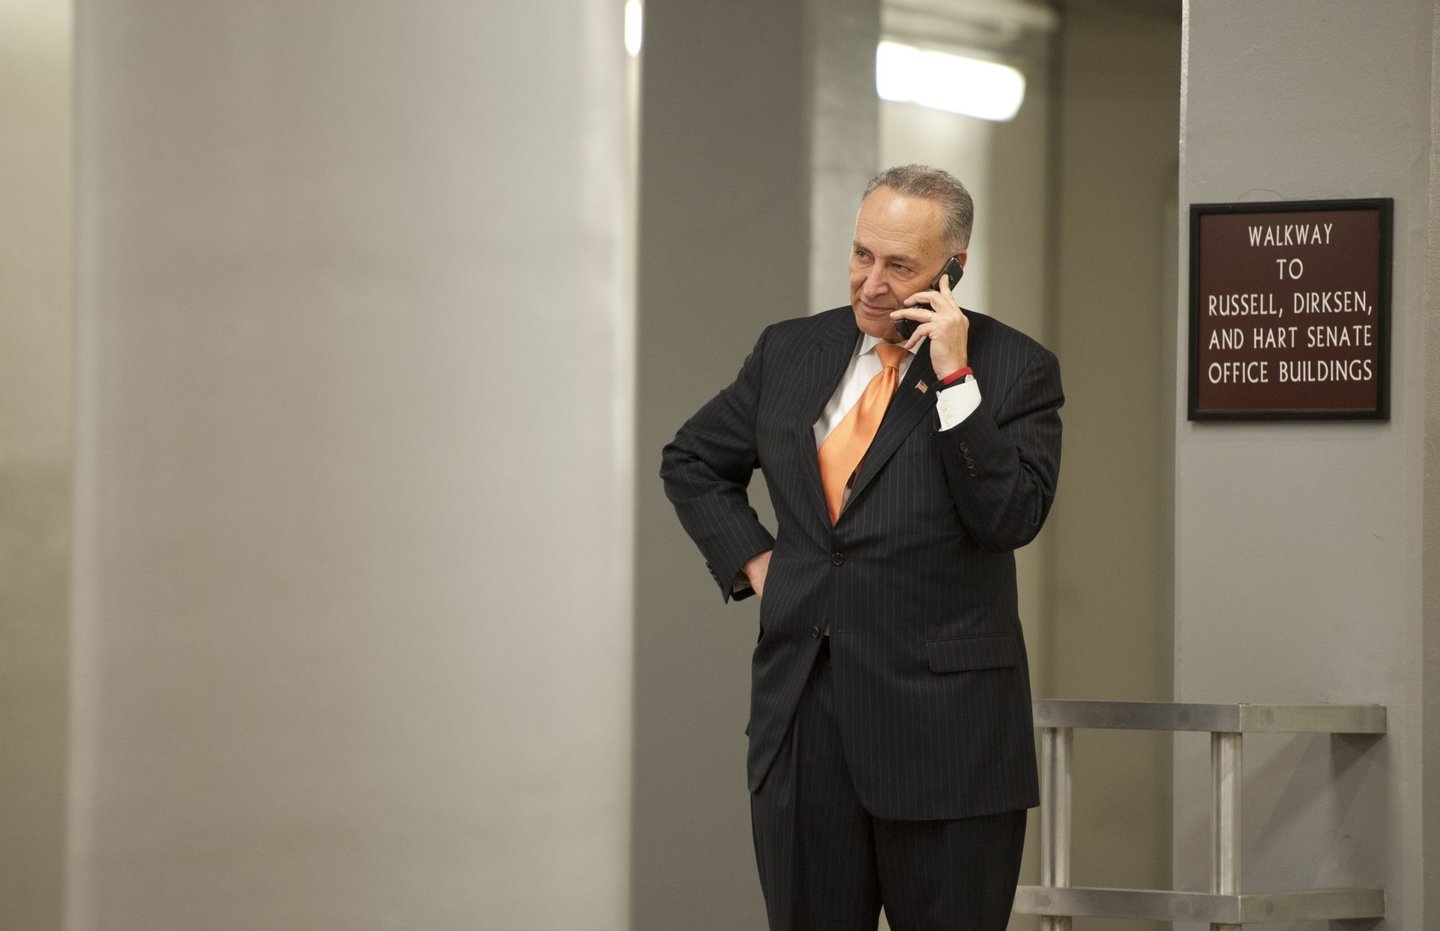 UNITED STATES - : Sen. Charles Schumer, D-NY., makes a call in the Senate subway of the U.S. Capitol on May 7, 2013. (Photo By Douglas Graham/CQ Roll Call)